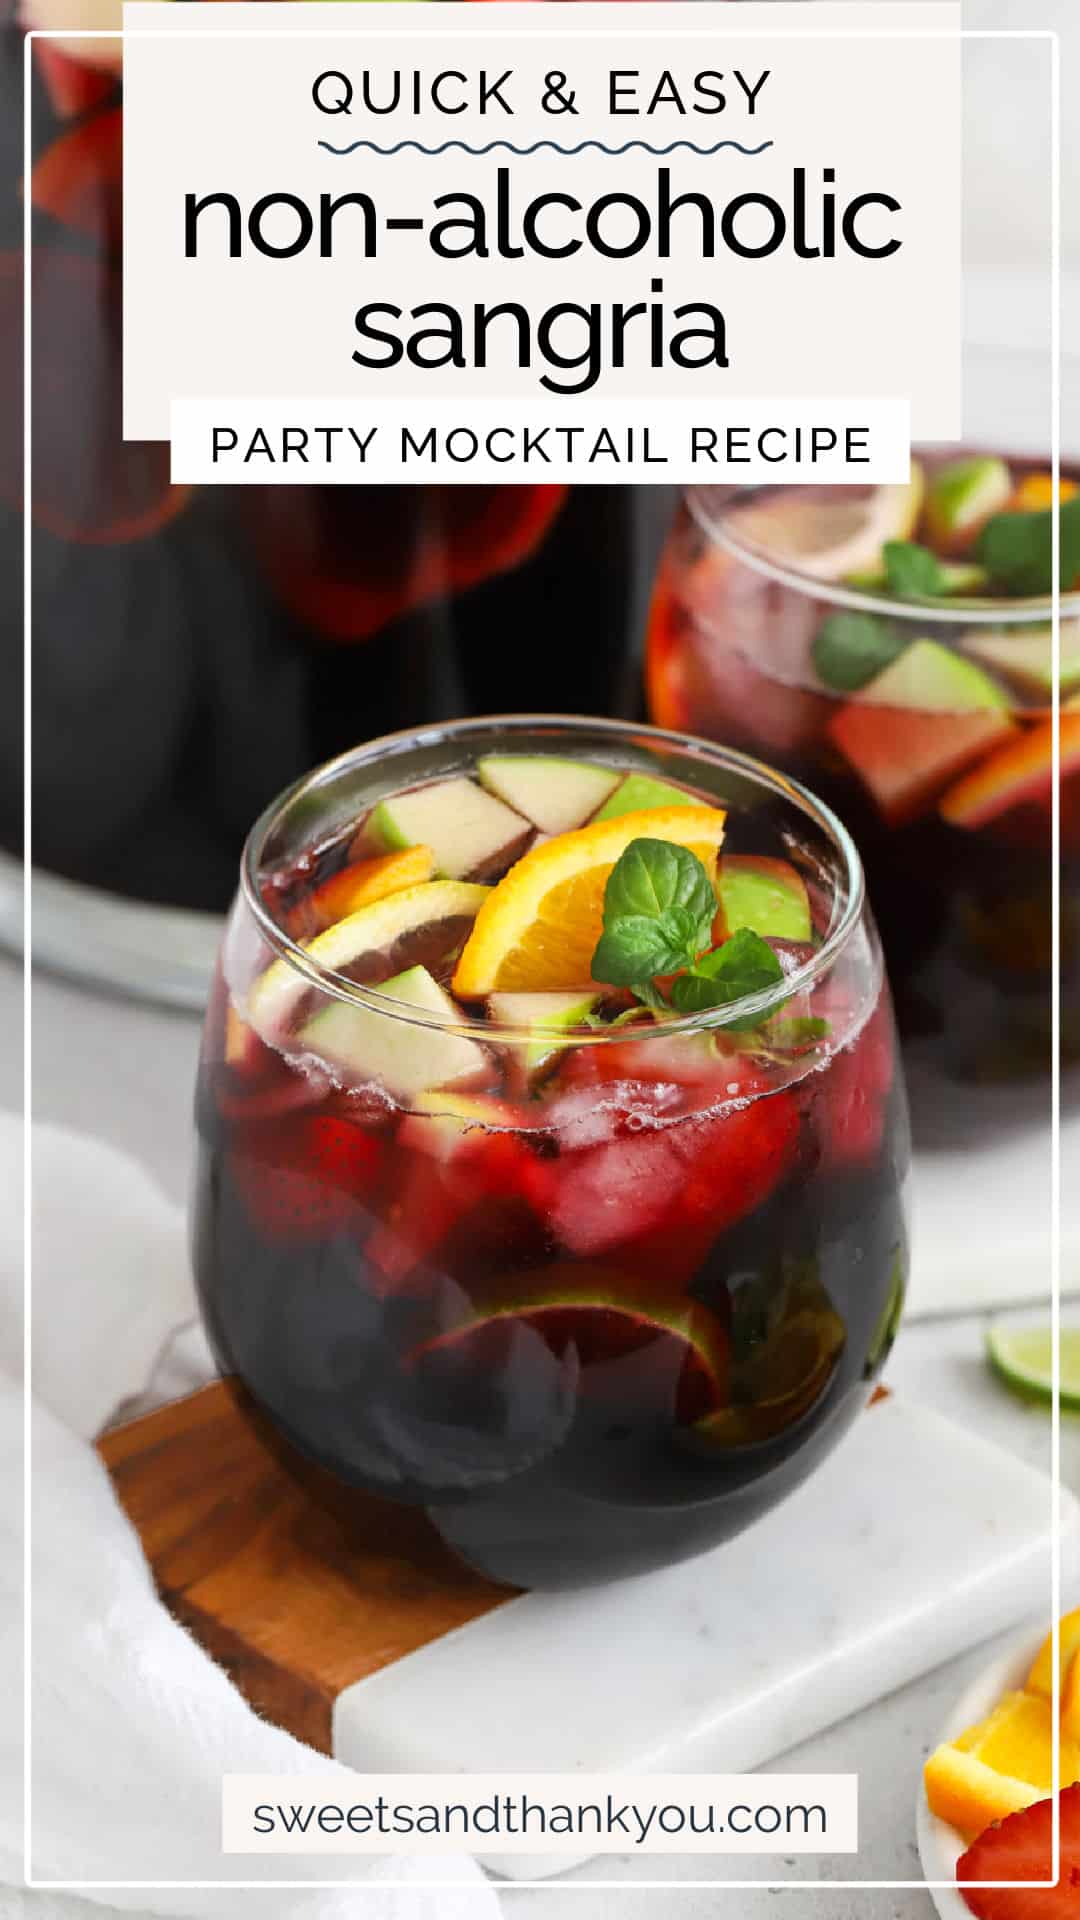 Non-Alcoholic Sangria - This virgin sangria mocktail is the perfect zero-proof drink recipe for your next party. Fresh, fruity, and flavorful--you'll love it! // Sangria mocktail recipe // the best nonalcoholic sangria recipe // virgin sangria recipe // virgin party drinks // sangria pitcher // non-alcoholic party drinks // easy non-alcoholic sangria // how to make non-alcoholic sangria // how to make virgin sangria // what's in virgin sangria //